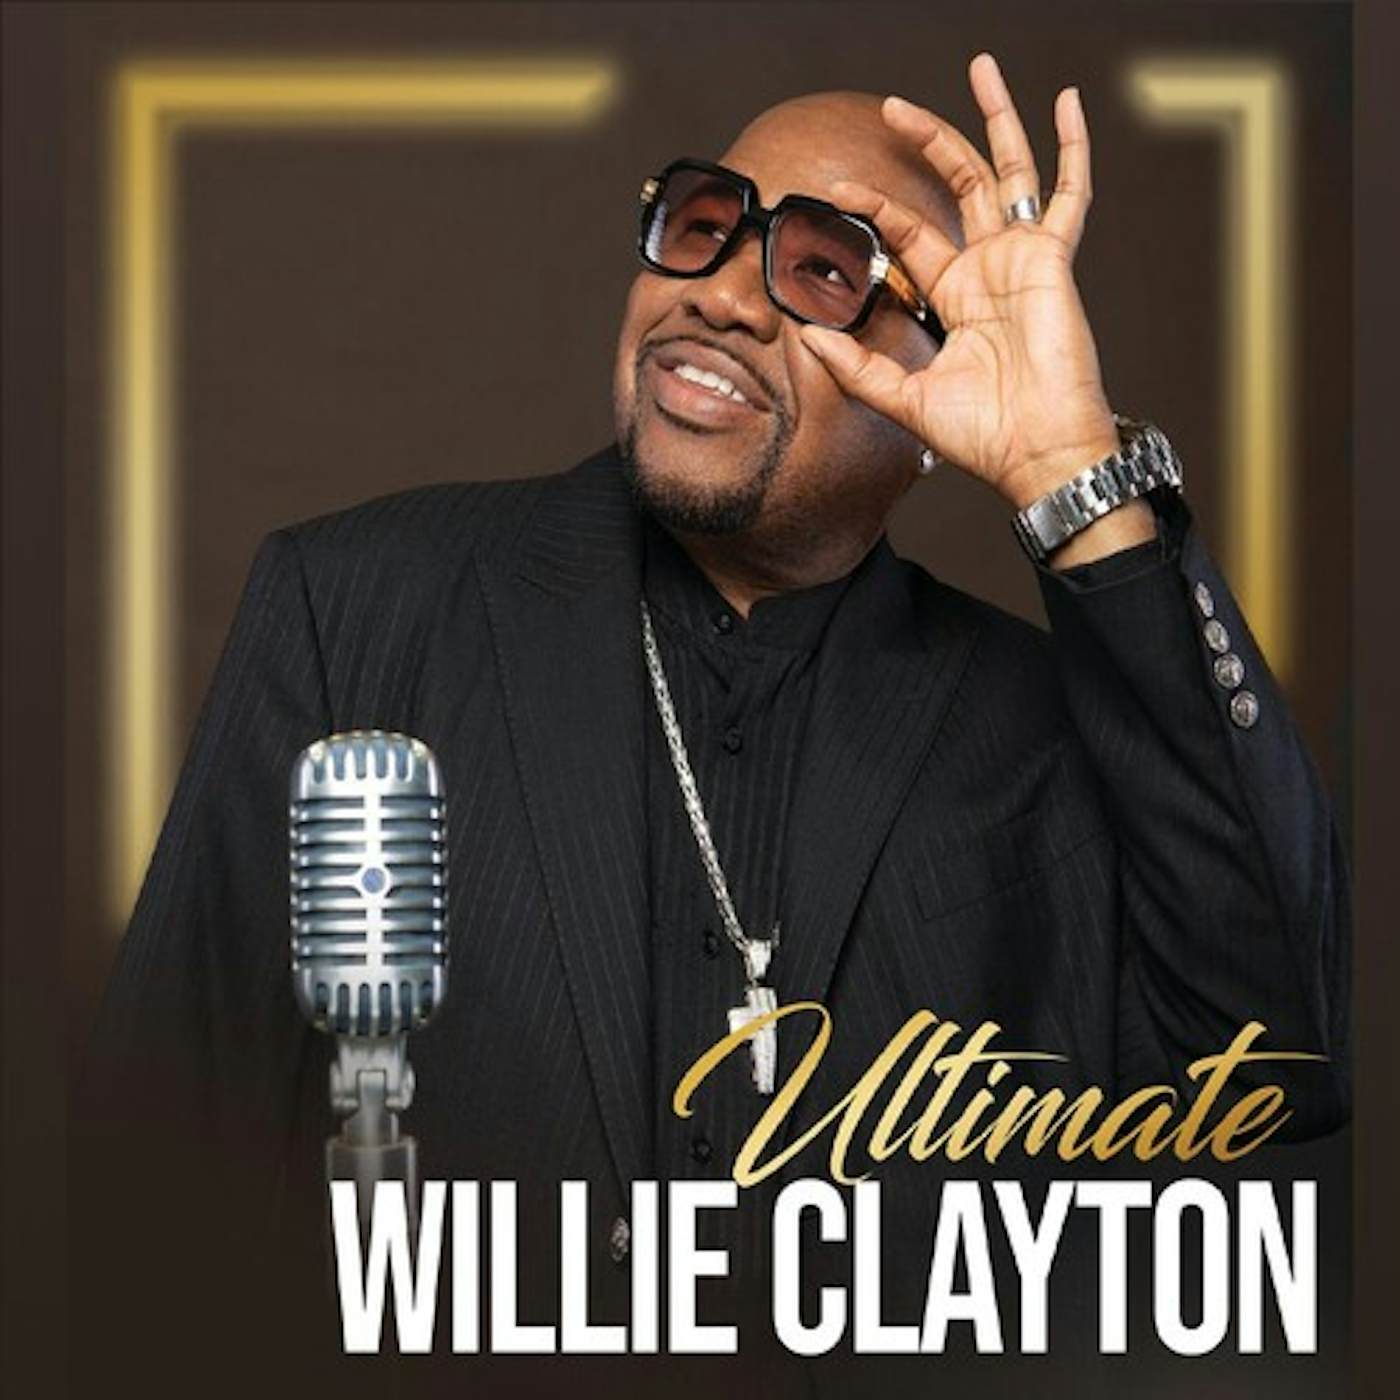 ULTIMATE WILLIE CLAYTON 1 CD